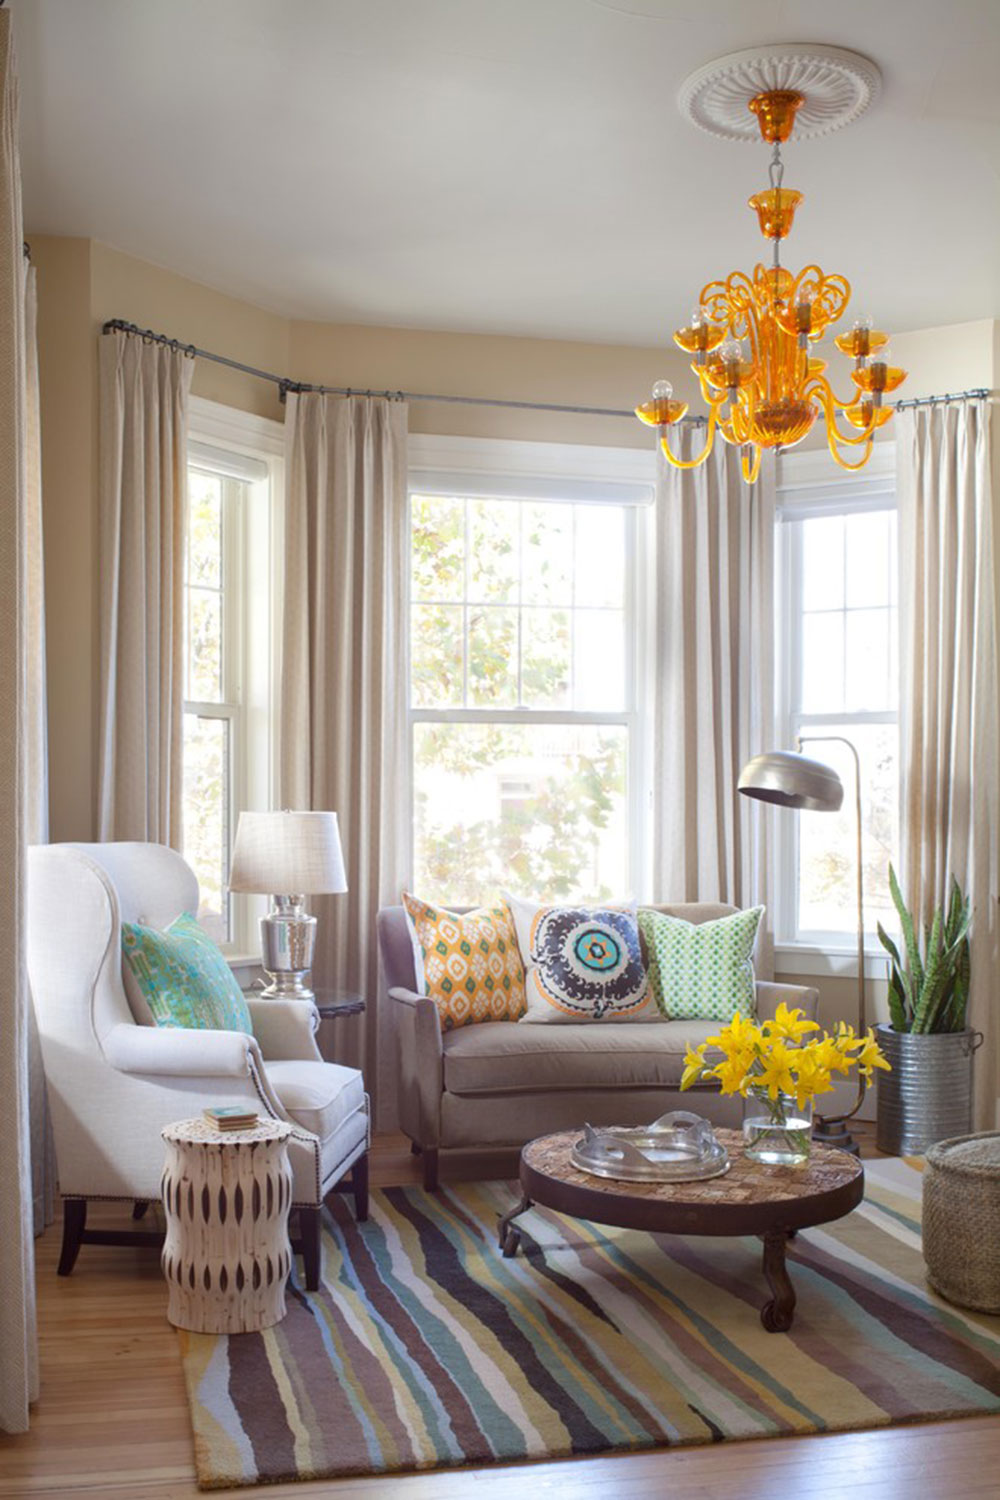 Bay Window Decor To Try In Your Home